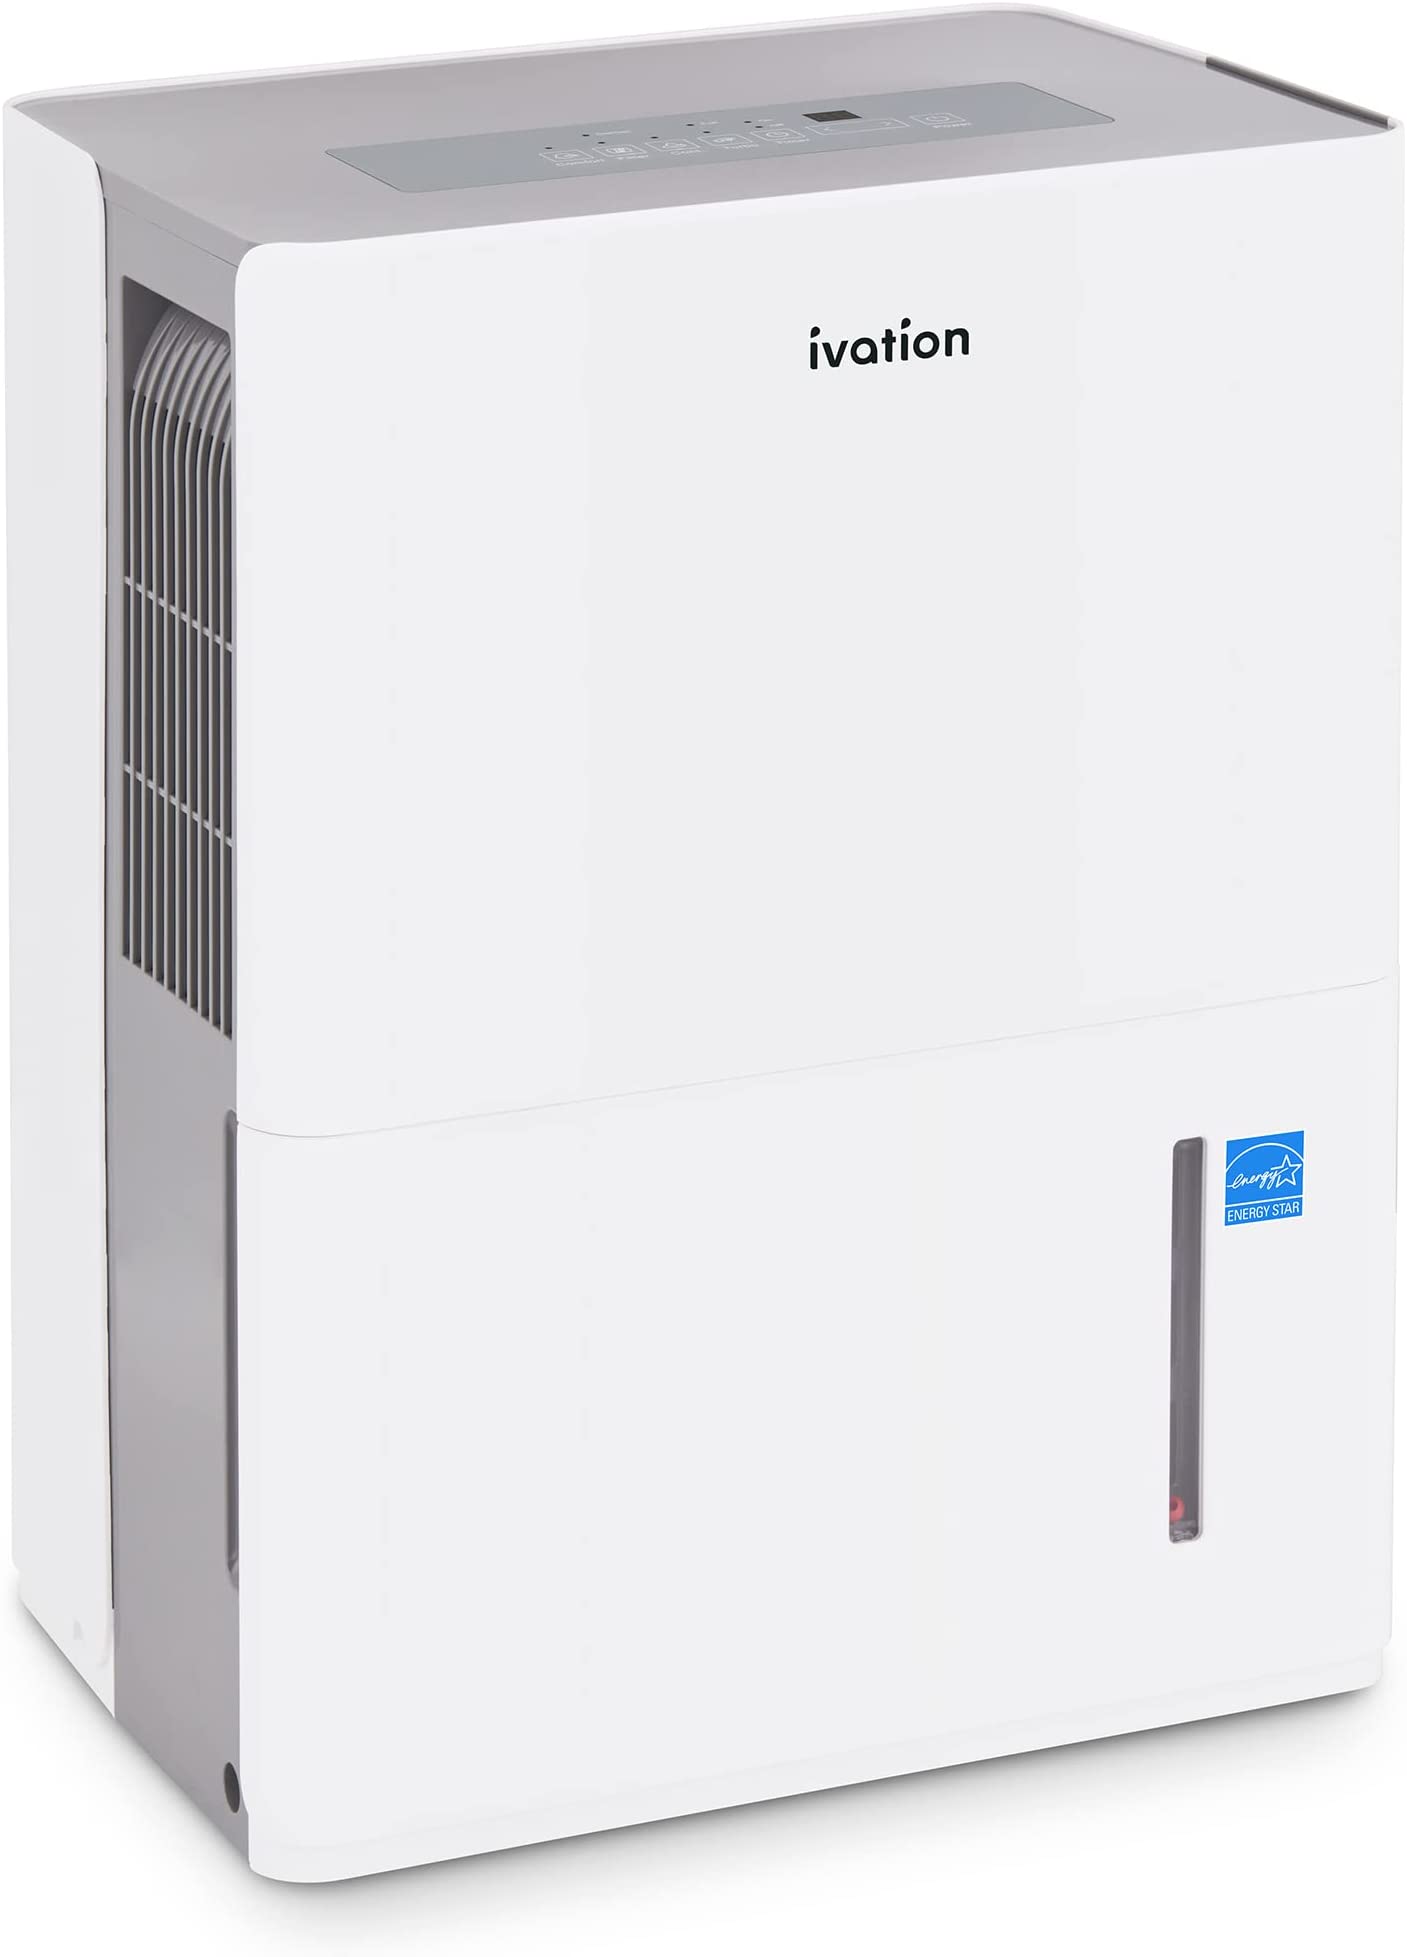 Ivation 1,500 Sq. Ft Energy Star Dehumidifier, Large Capacity Compressor De-humidifier for Extra Big Rooms and Basements